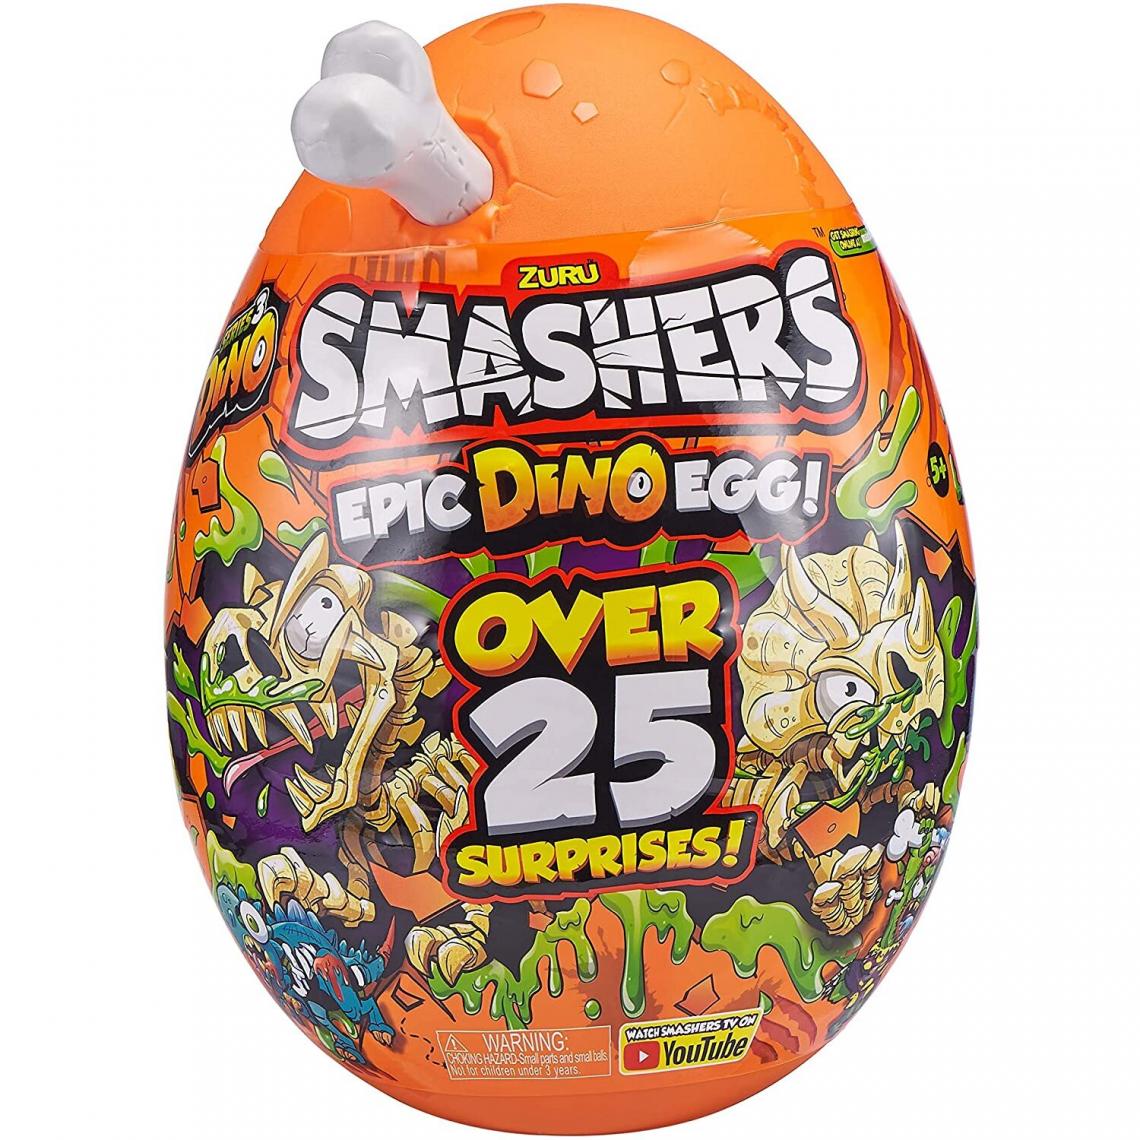 Universal - Zulu Crusher 3 Epic Dinosaur Egg Collection (Os colorés) - Animaux